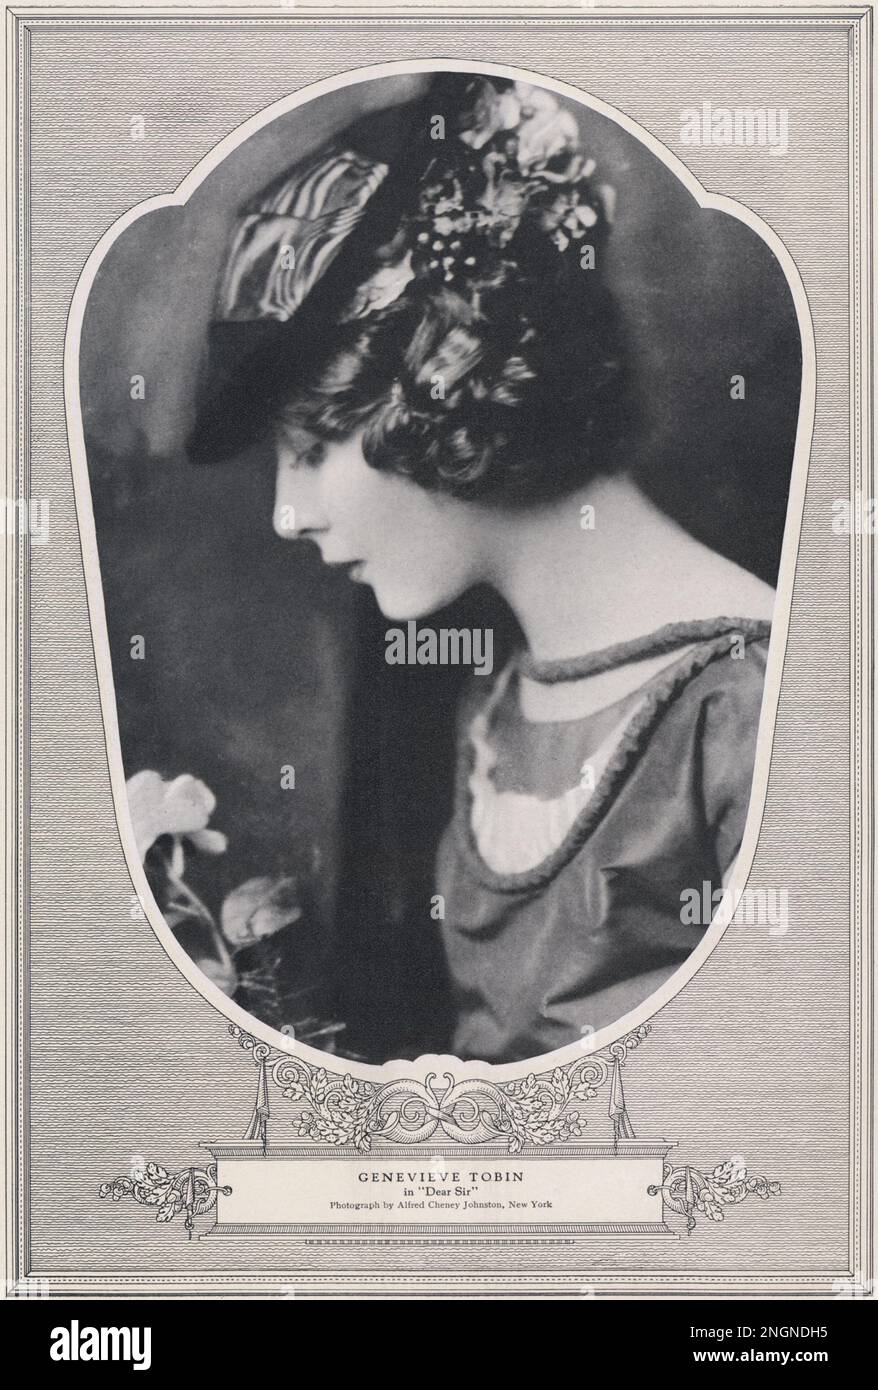 Genevieve Tobin - photo by Alfred Cheney Johnston (N Y) - restored from an original Jan 1925 periodical by Montana Photographer, publicizing play 'Dear Sir' (1924), but actually taken for 'Polly Preferred' (1923) Stock Photo